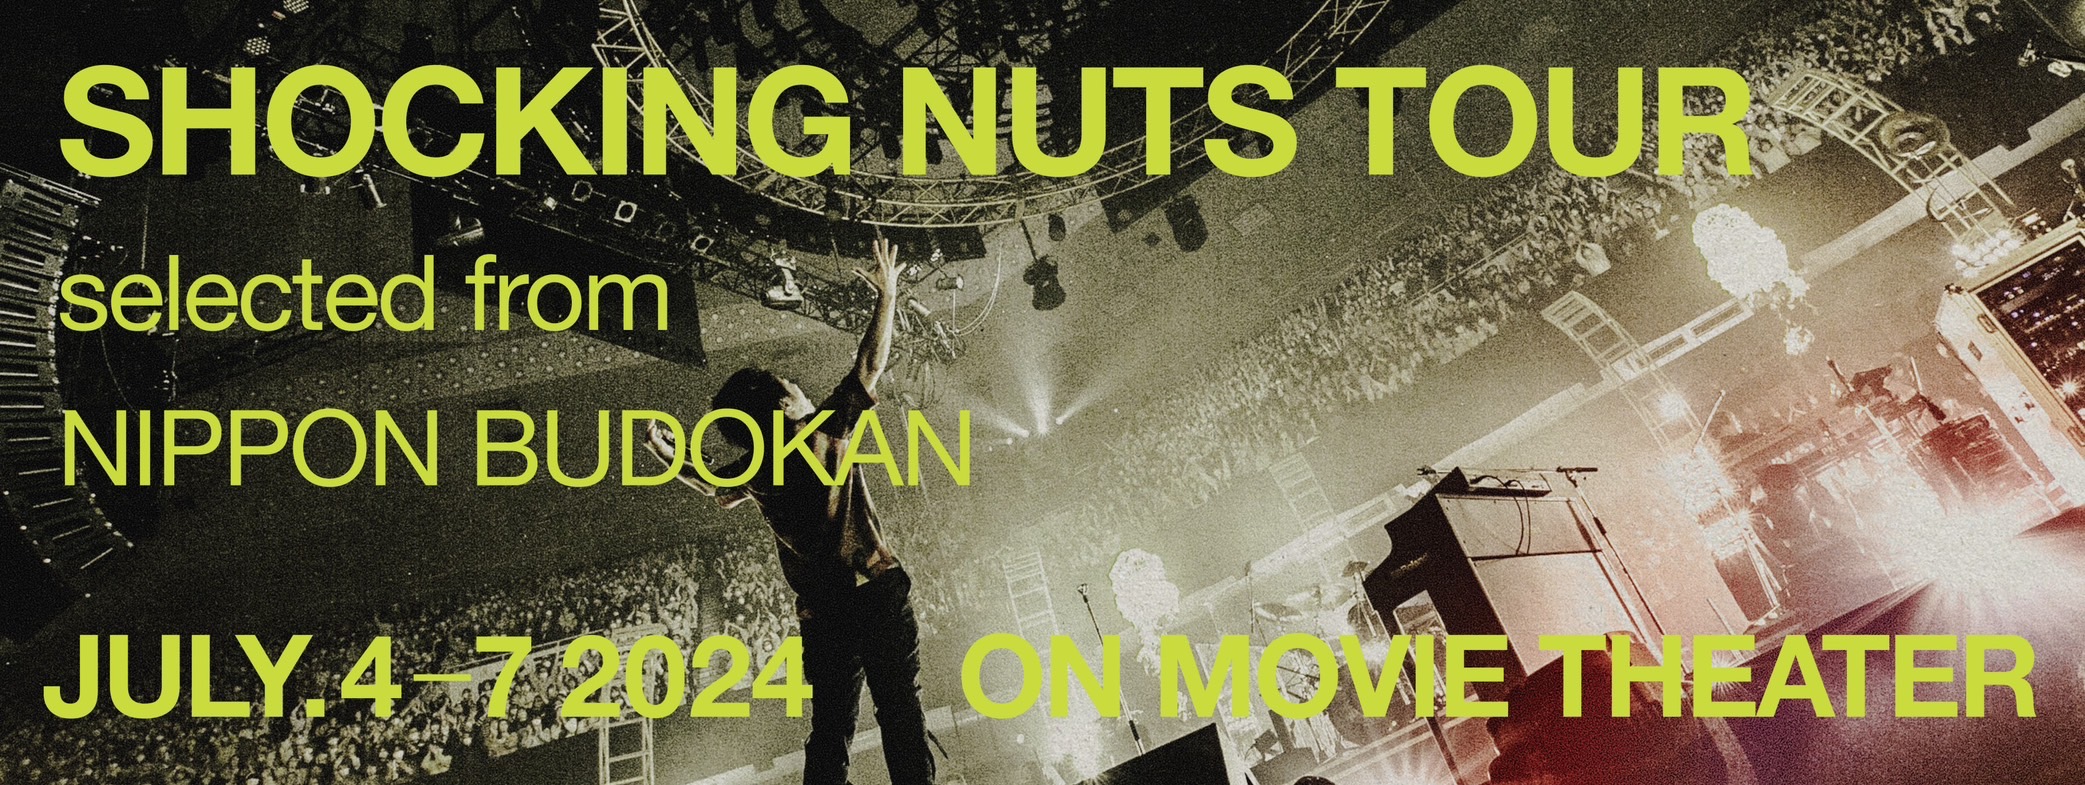 SHOCKING NUTS TOUR  selected from NIPPON BUDOKAN